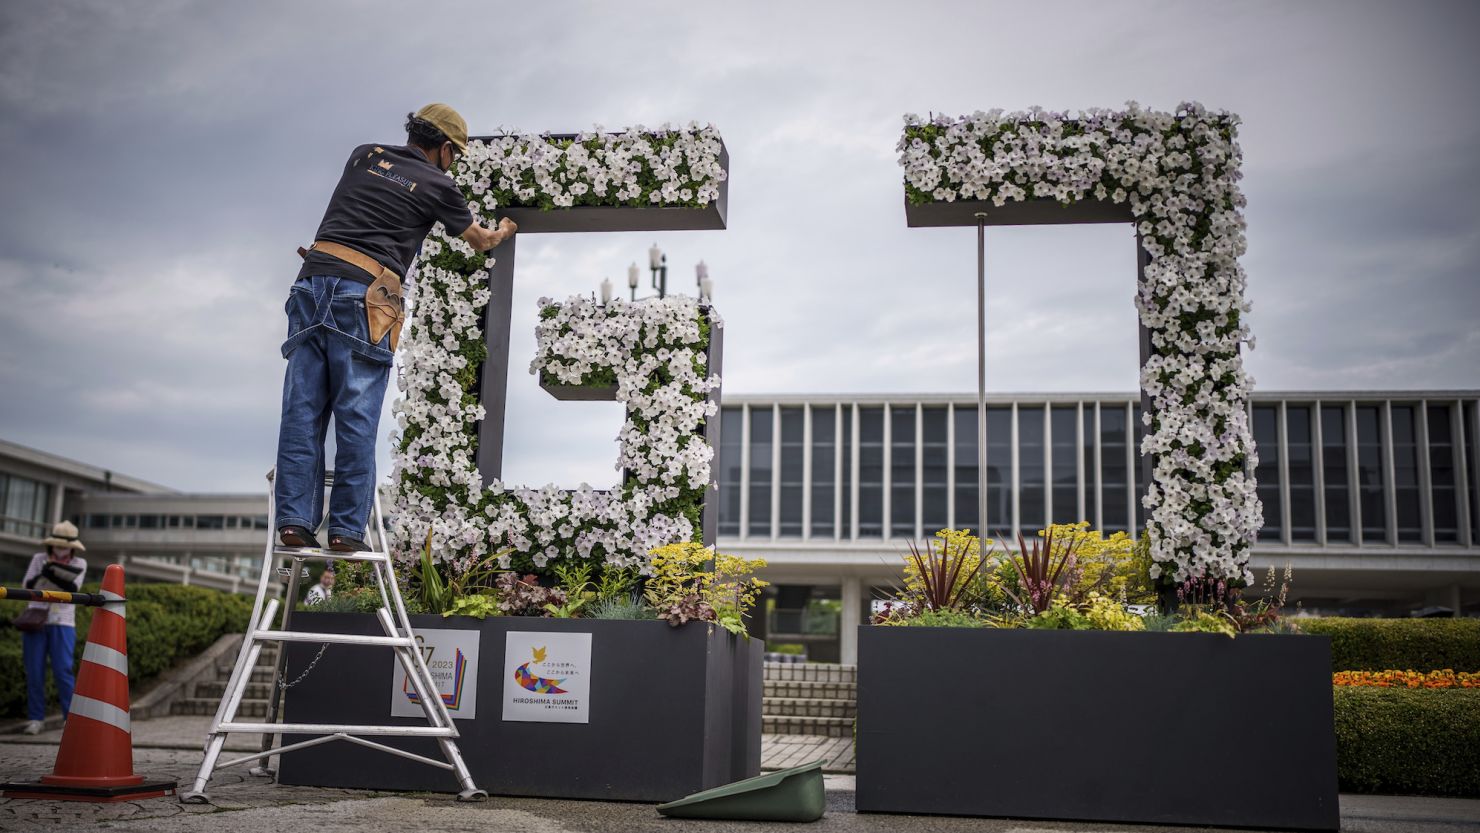 A gardener works on a G7 logo made of flowers with Genbaku Dome in the background in Hiroshima Peace Memorial Park on Thursday. 